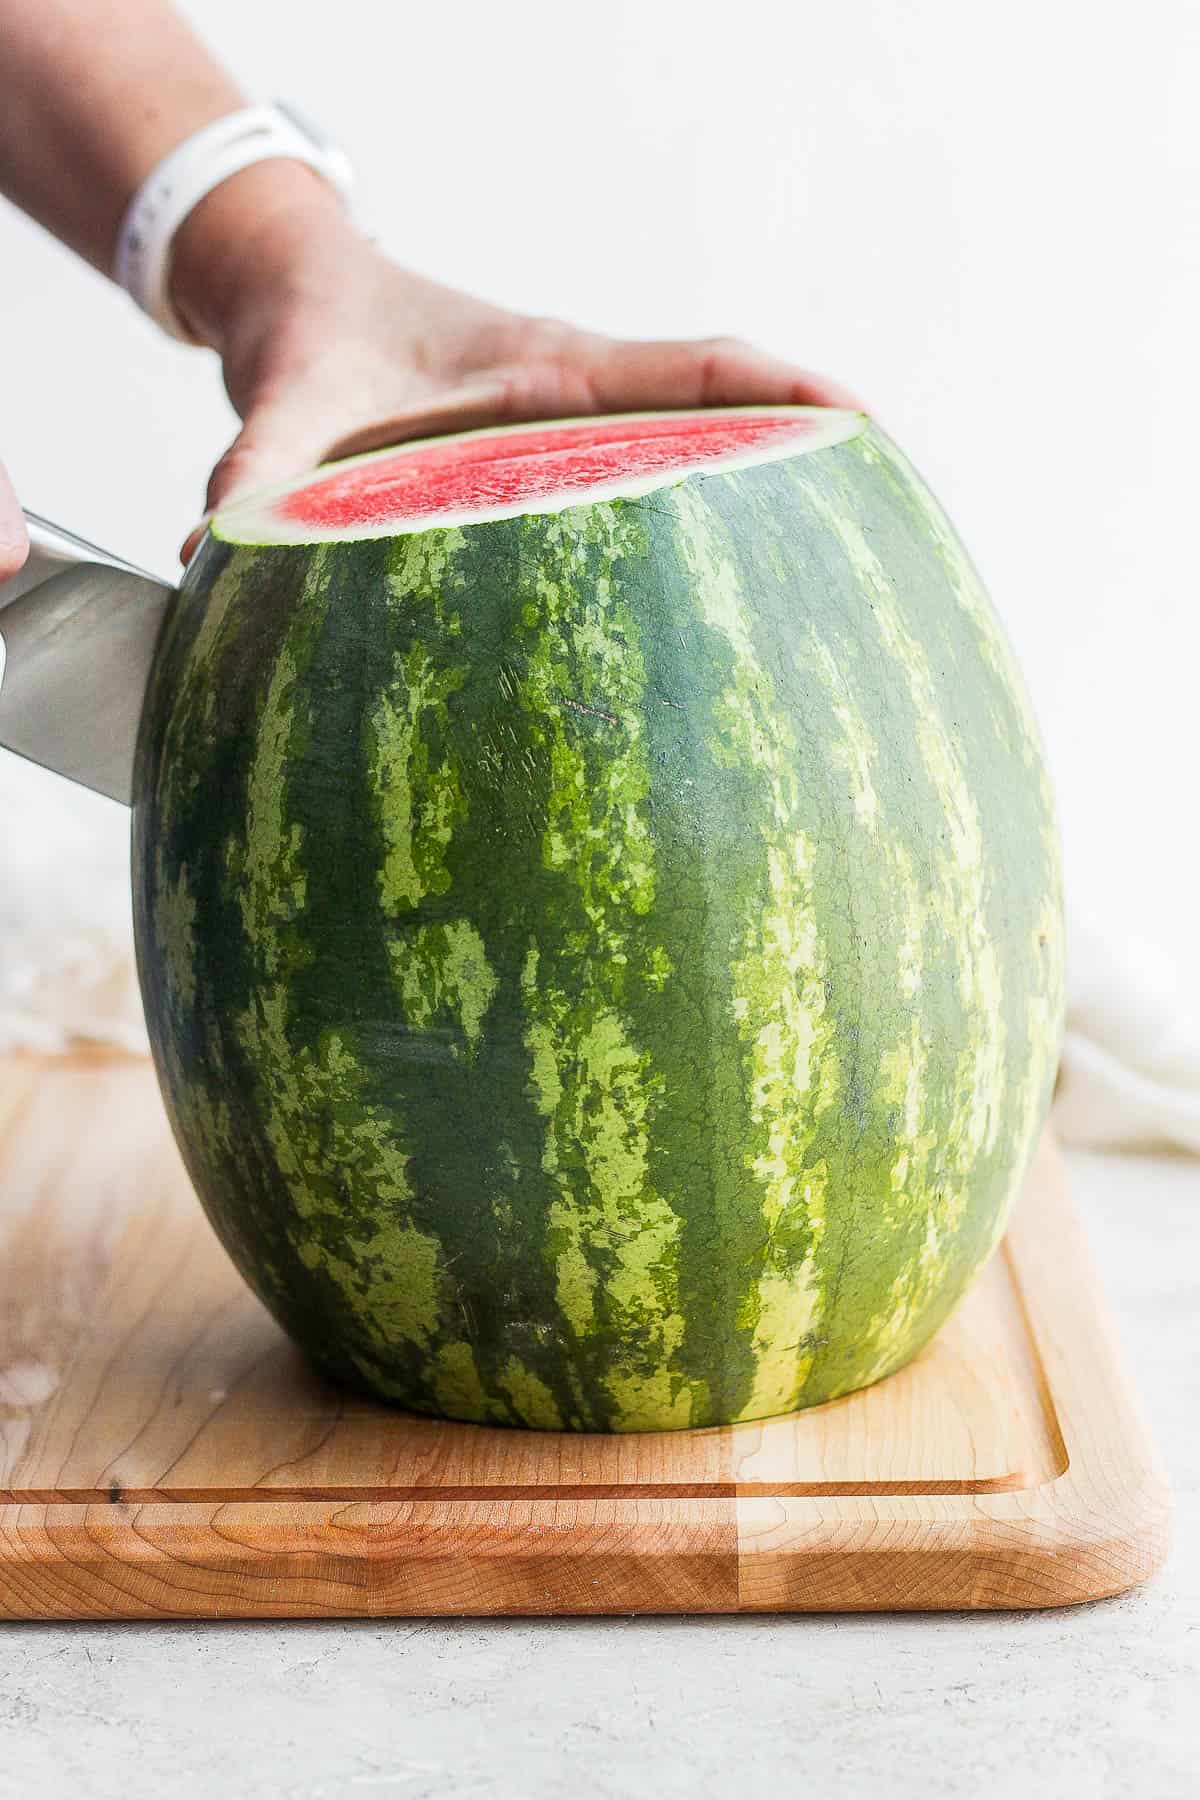 A whole watermelon being cut in half, lengthwise.